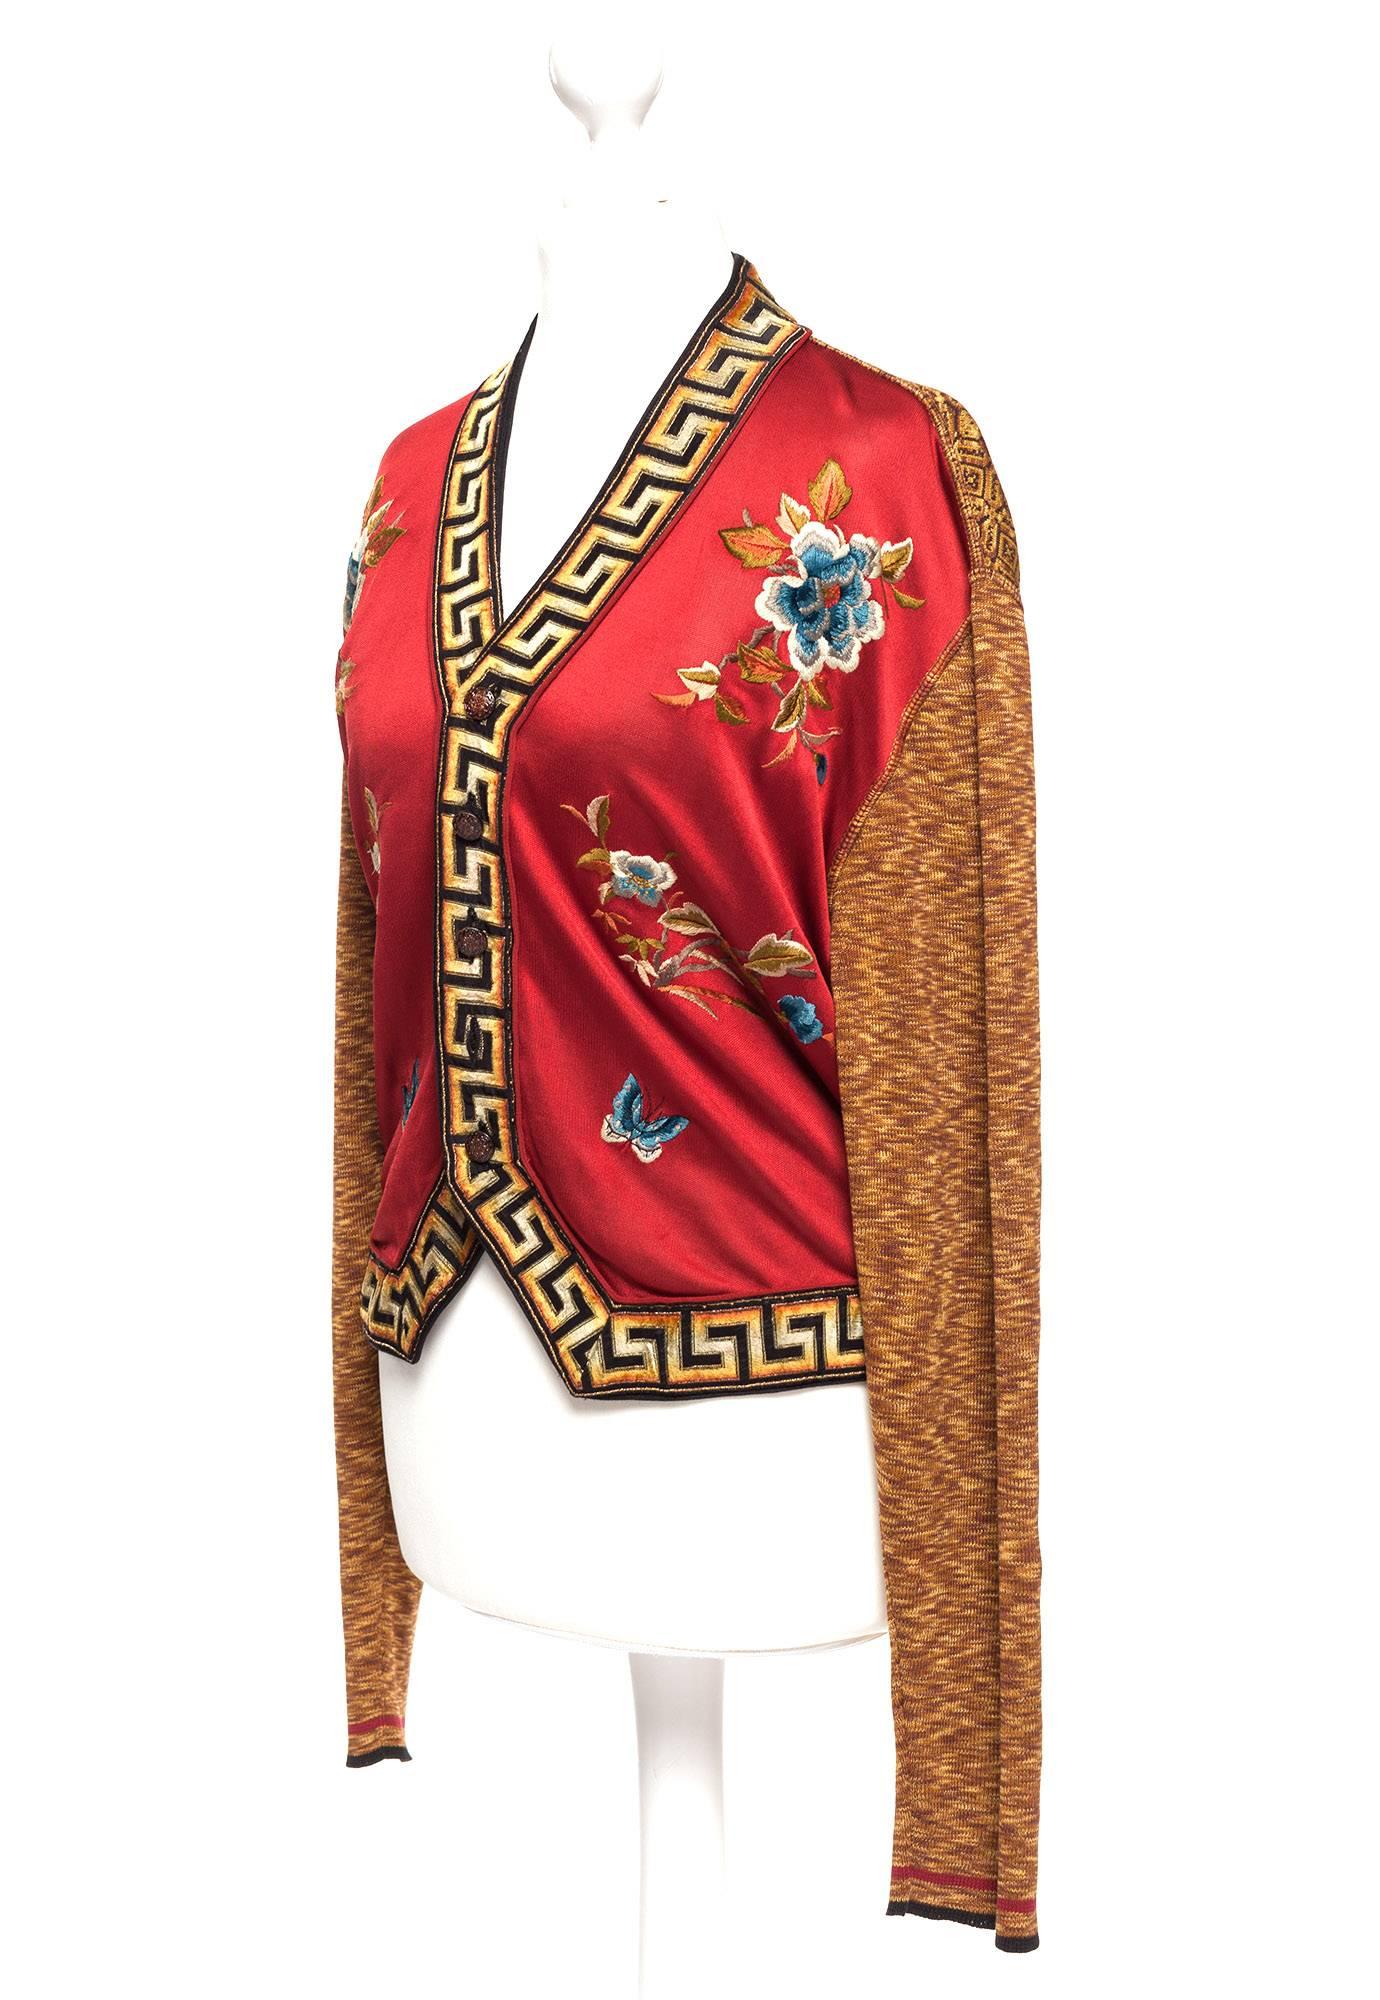  Cardigan is in a space dye gold tone knit, red satin front panels with multi colored flowers, black gold, red tone greek key trim around neck and bottom front with black and floral metal buttons, a true design classic from JPG.